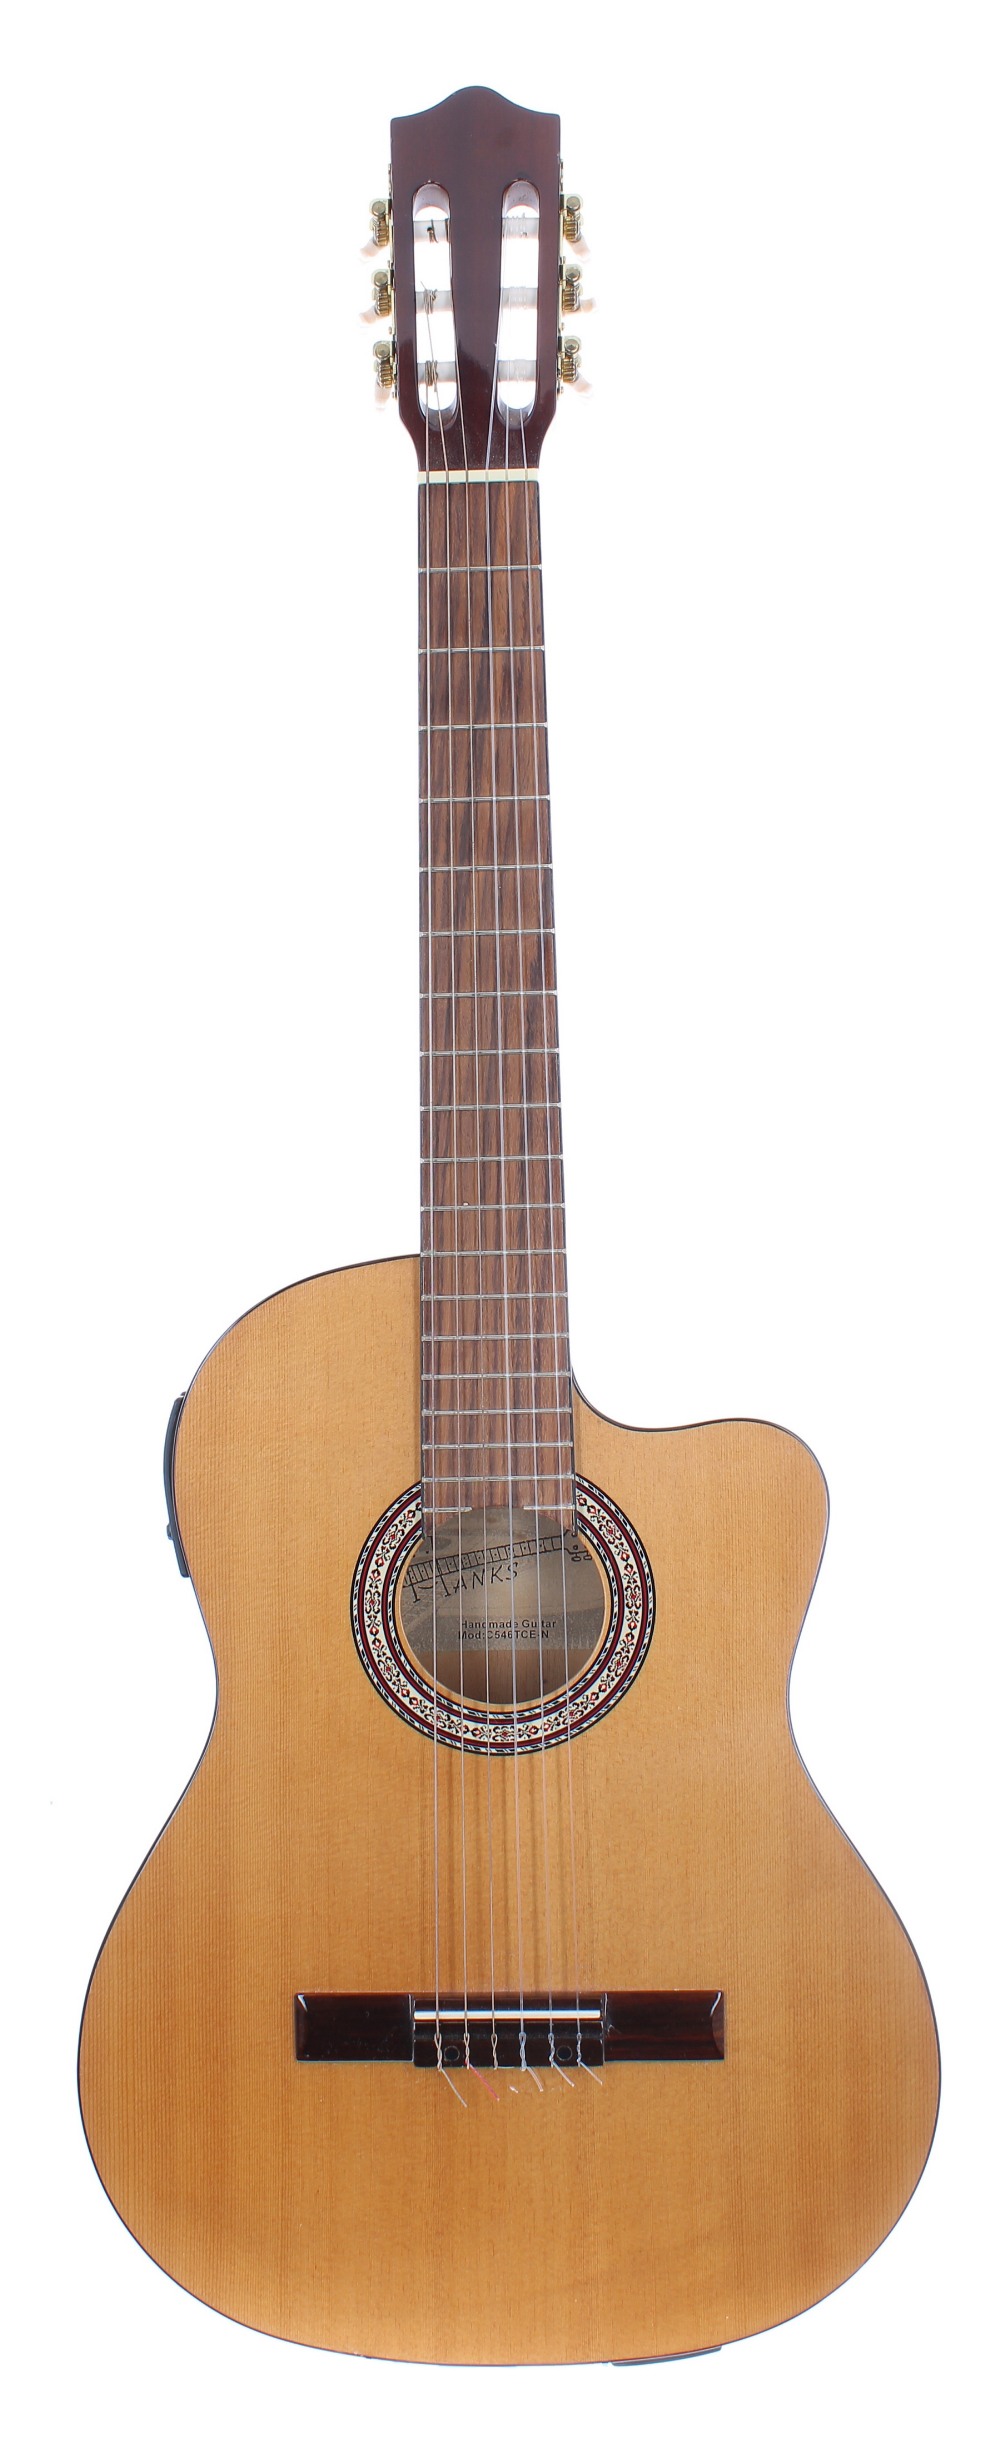 2018 Tanglewood Winterleaf TWCE2 electric nylon string guitar, ser. no. YU18xxxxx8; Back and - Image 3 of 4